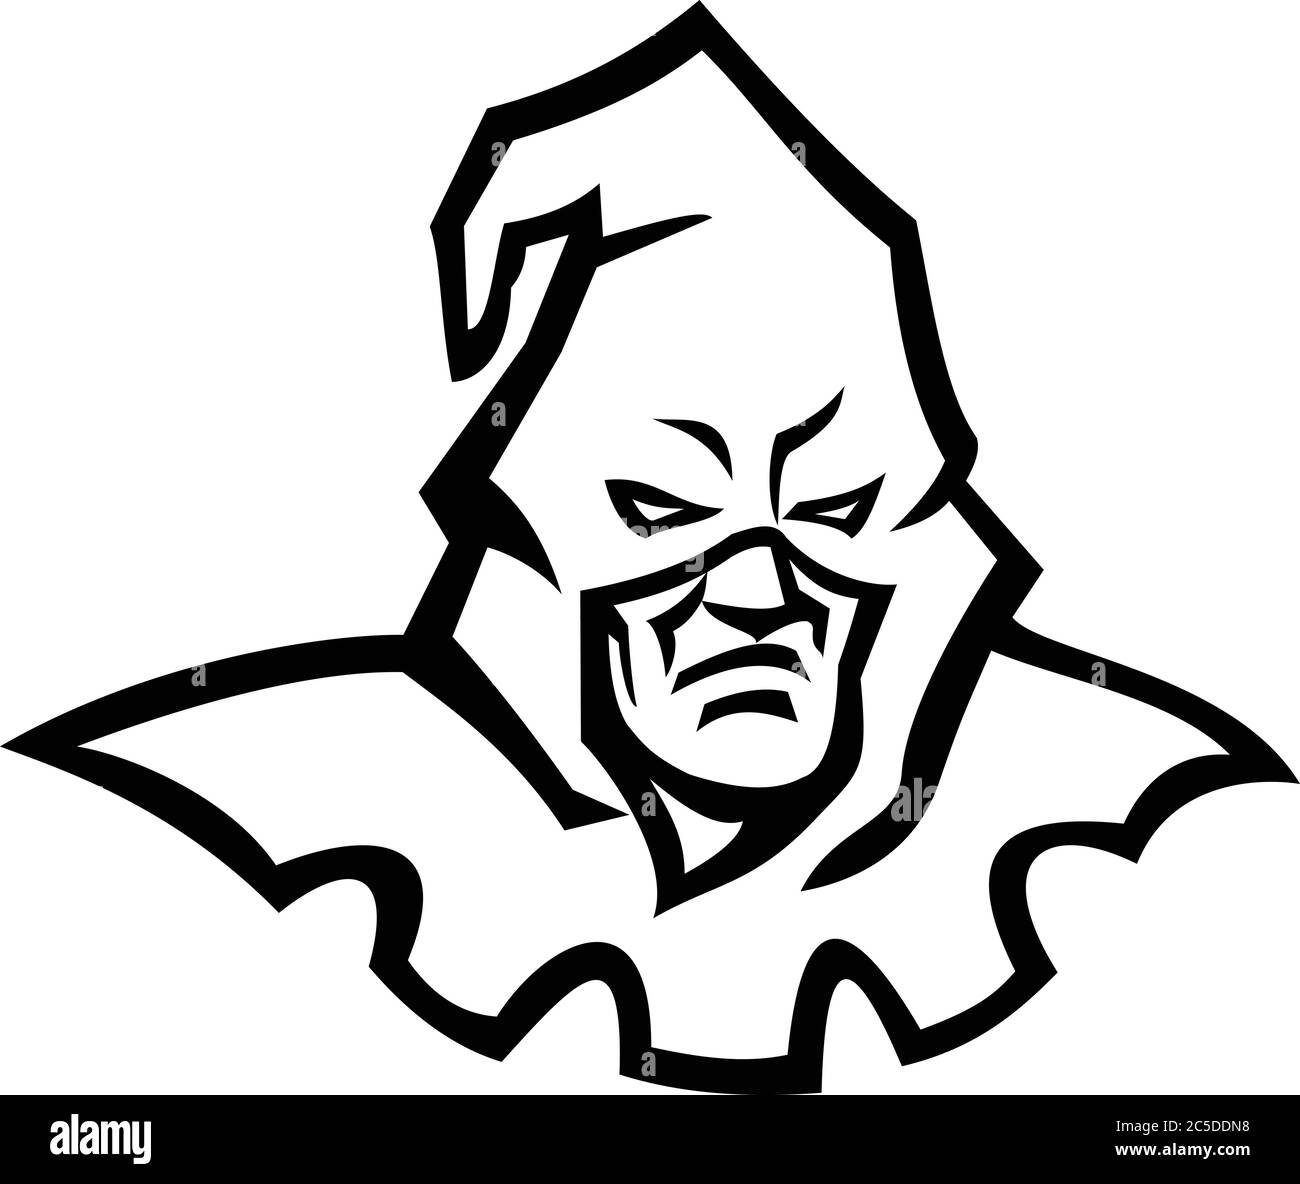 Black and white mascot illustration of  head of a hooded medieval or absolutist executioner or headsman wearing mask viewed from front on isolated bac Stock Vector